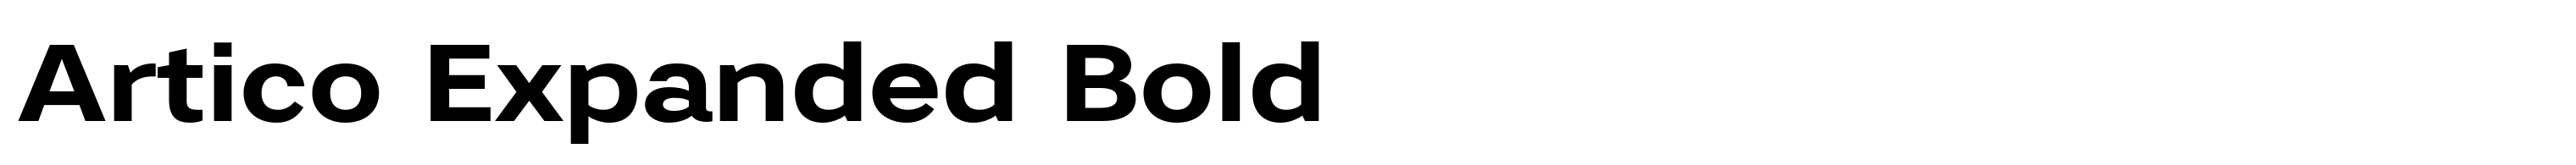 Artico Expanded Bold